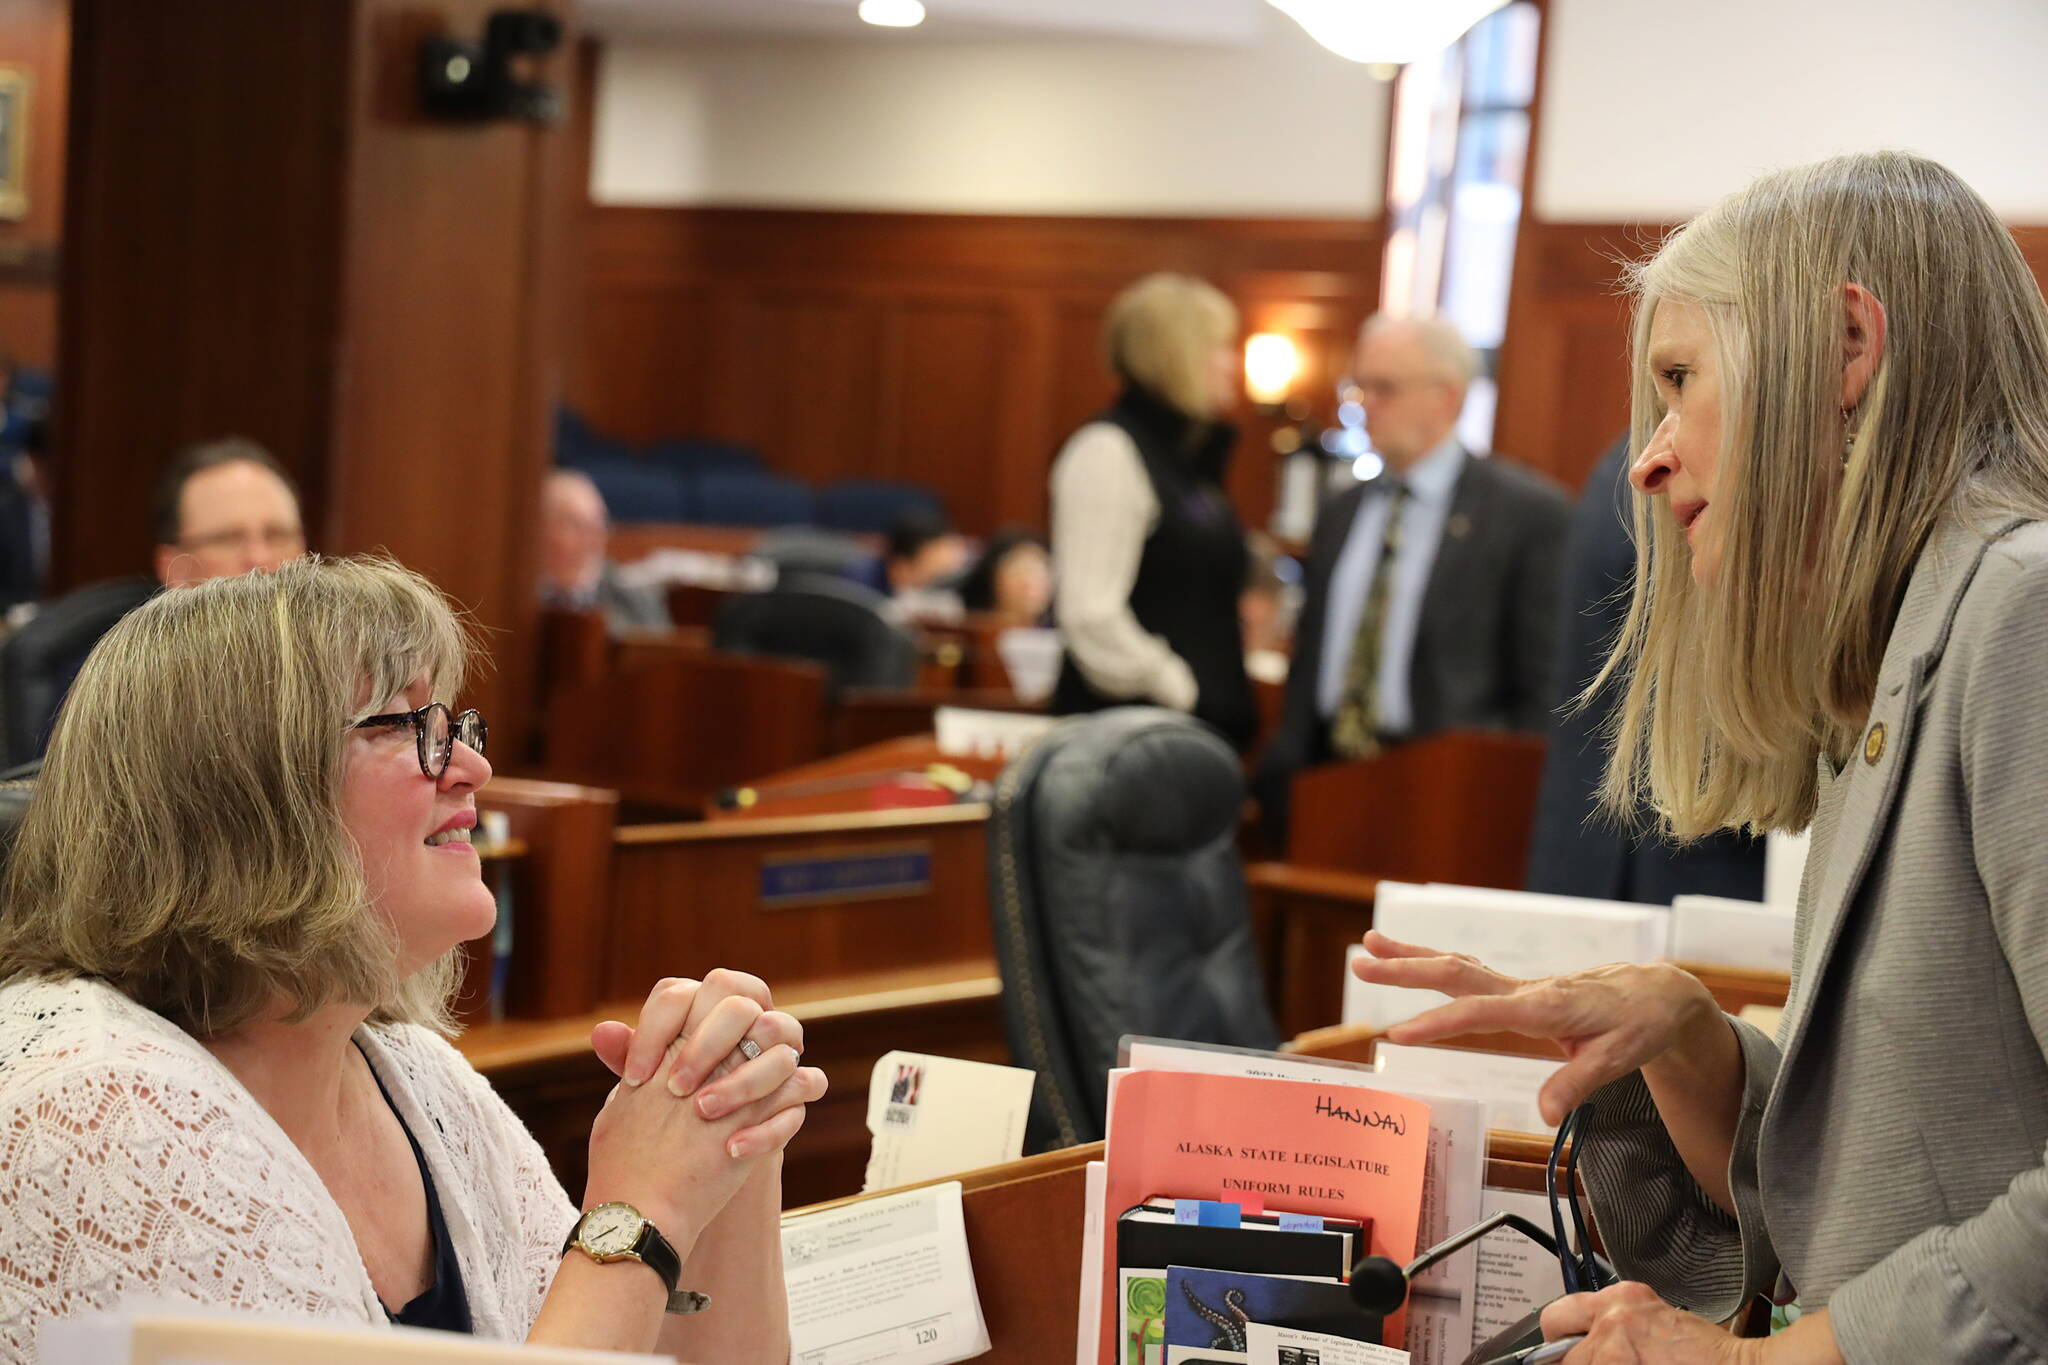 Juneau state representatives Sara Hannan, left, and Andi Story discuss legislative business during a break in the House floor session on Tuesday. Both Democratic members were part of the minority caucus this session after being in the majority during their first two terms. (Clarise Larson / Juneau Empire)